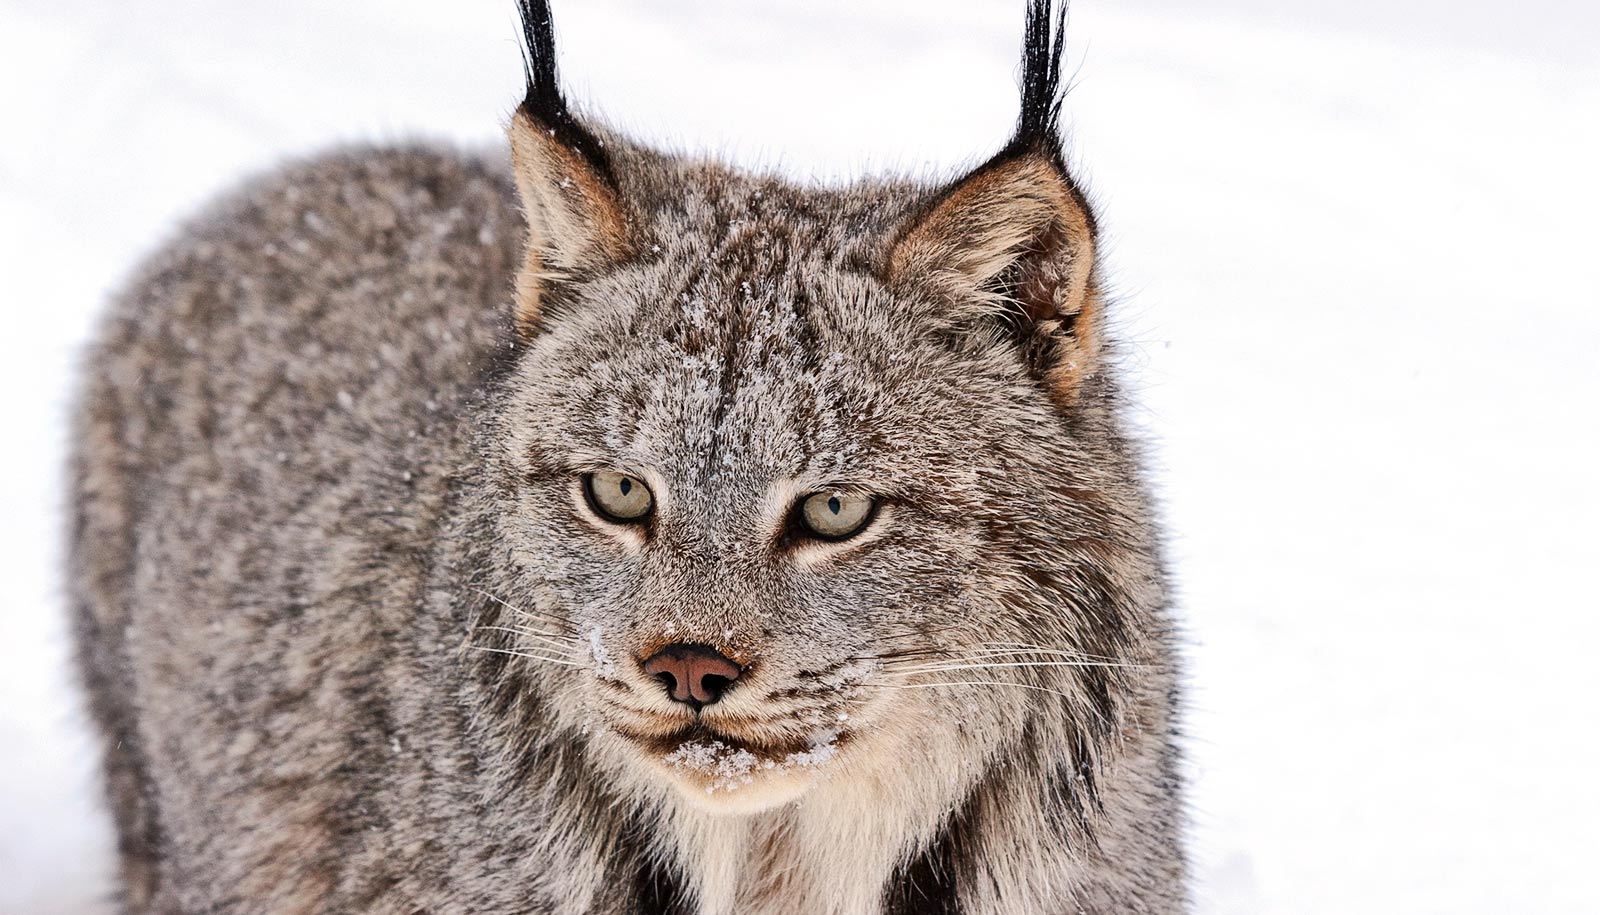 Canada lynx likely roamed the US more than once thought